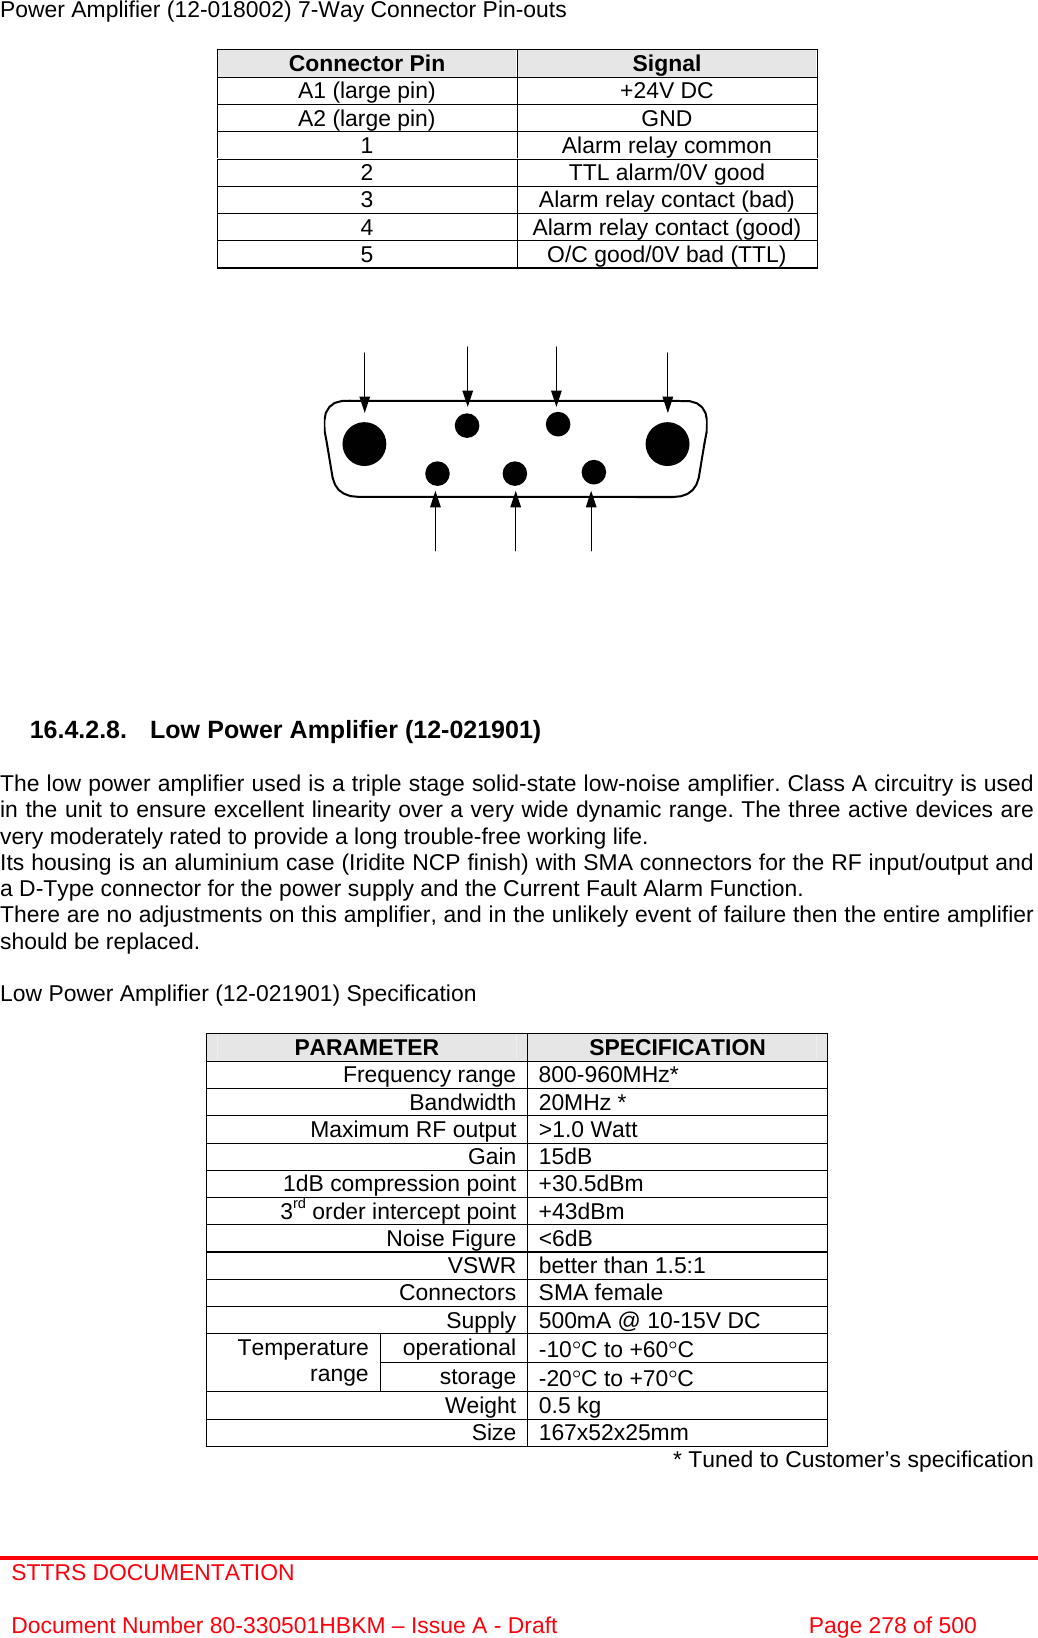 STTRS DOCUMENTATION  Document Number 80-330501HBKM – Issue A - Draft  Page 278 of 500   Power Amplifier (12-018002) 7-Way Connector Pin-outs  Connector Pin  Signal A1 (large pin)  +24V DC A2 (large pin)  GND 1  Alarm relay common 2  TTL alarm/0V good 3  Alarm relay contact (bad) 4  Alarm relay contact (good) 5  O/C good/0V bad (TTL)                  16.4.2.8.  Low Power Amplifier (12-021901)  The low power amplifier used is a triple stage solid-state low-noise amplifier. Class A circuitry is used in the unit to ensure excellent linearity over a very wide dynamic range. The three active devices are very moderately rated to provide a long trouble-free working life.  Its housing is an aluminium case (Iridite NCP finish) with SMA connectors for the RF input/output and a D-Type connector for the power supply and the Current Fault Alarm Function. There are no adjustments on this amplifier, and in the unlikely event of failure then the entire amplifier should be replaced.  Low Power Amplifier (12-021901) Specification  PARAMETER  SPECIFICATION Frequency range 800-960MHz* Bandwidth 20MHz * Maximum RF output &gt;1.0 Watt Gain 15dB 1dB compression point +30.5dBm 3rd order intercept point +43dBm Noise Figure &lt;6dB VSWR better than 1.5:1 Connectors SMA female Supply 500mA @ 10-15V DC operational -10°C to +60°C Temperature range  storage -20°C to +70°C Weight 0.5 kg Size 167x52x25mm * Tuned to Customer’s specification 